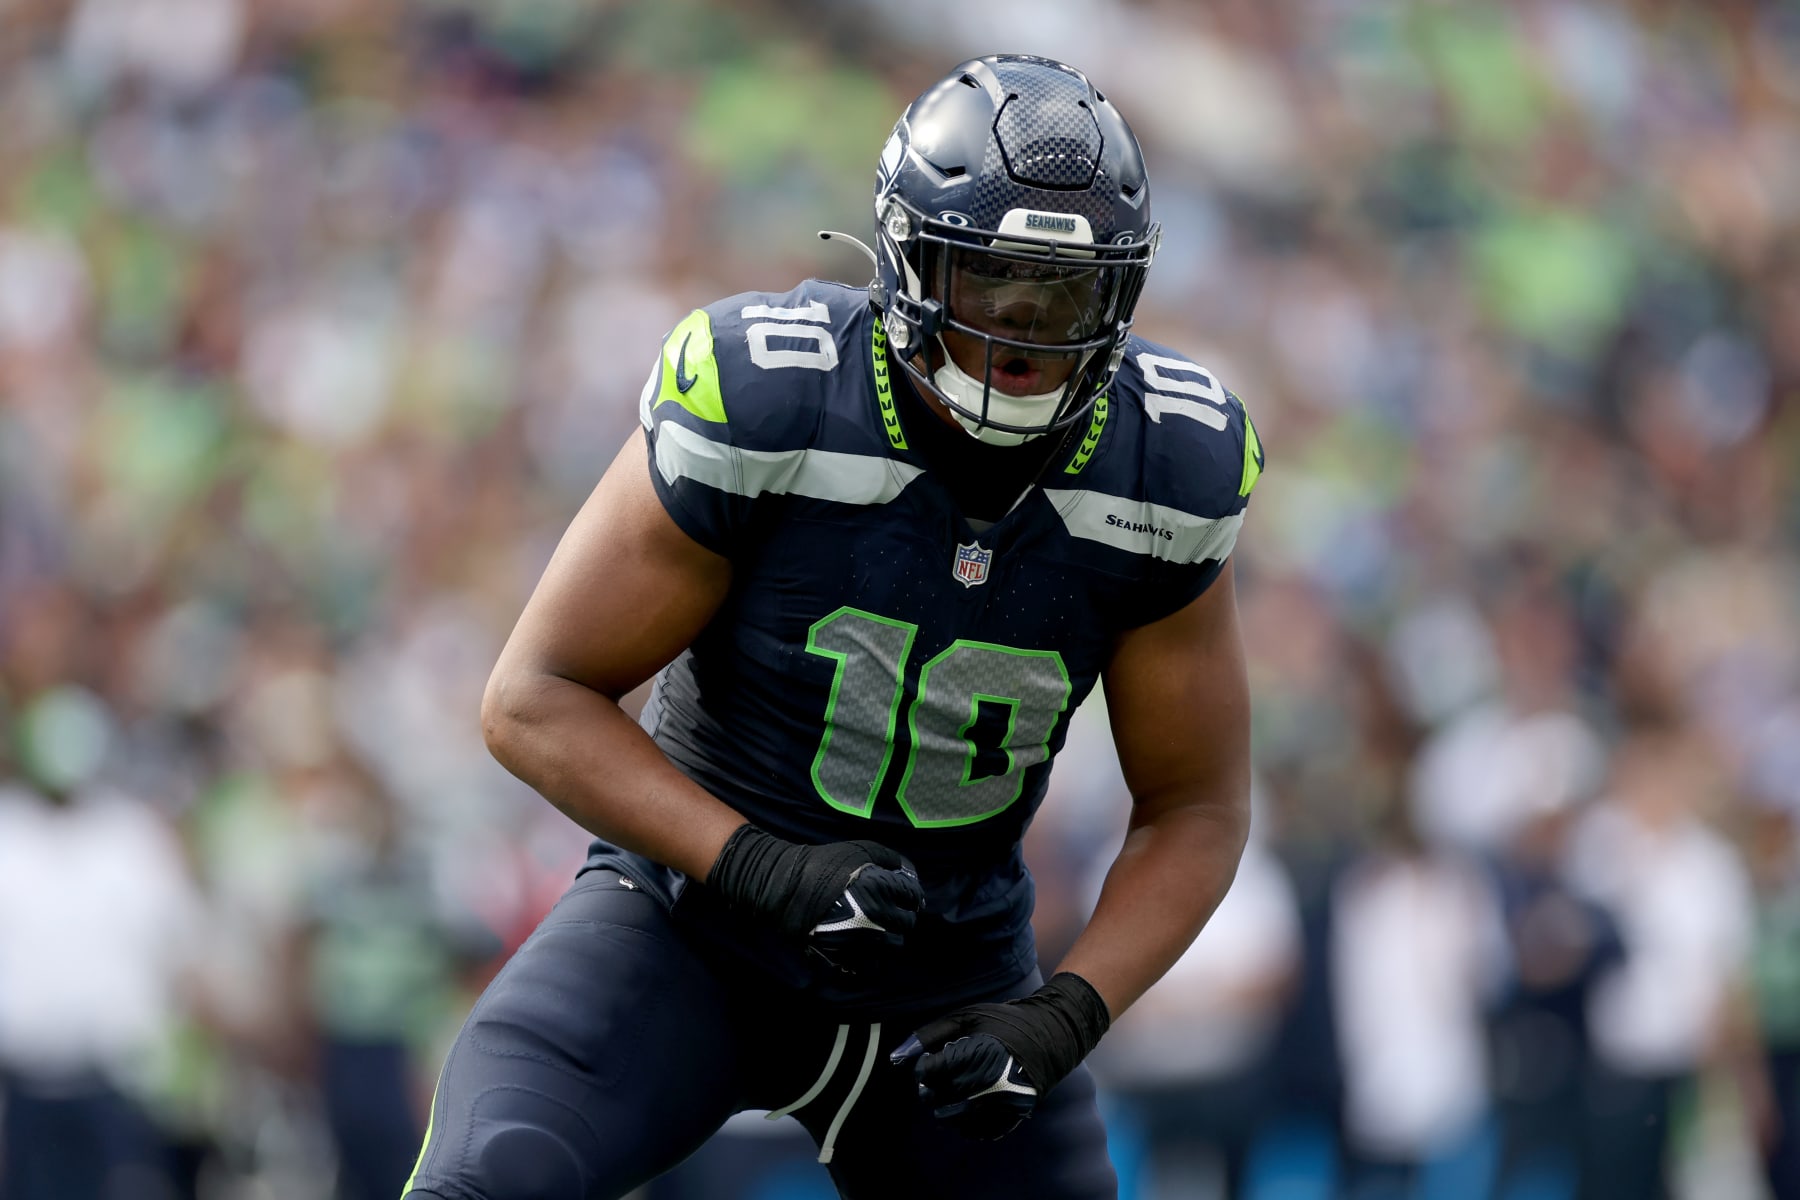 Seahawks rookie Cameron Young has the build (and buy-in) to earn key D-line  role - The Athletic